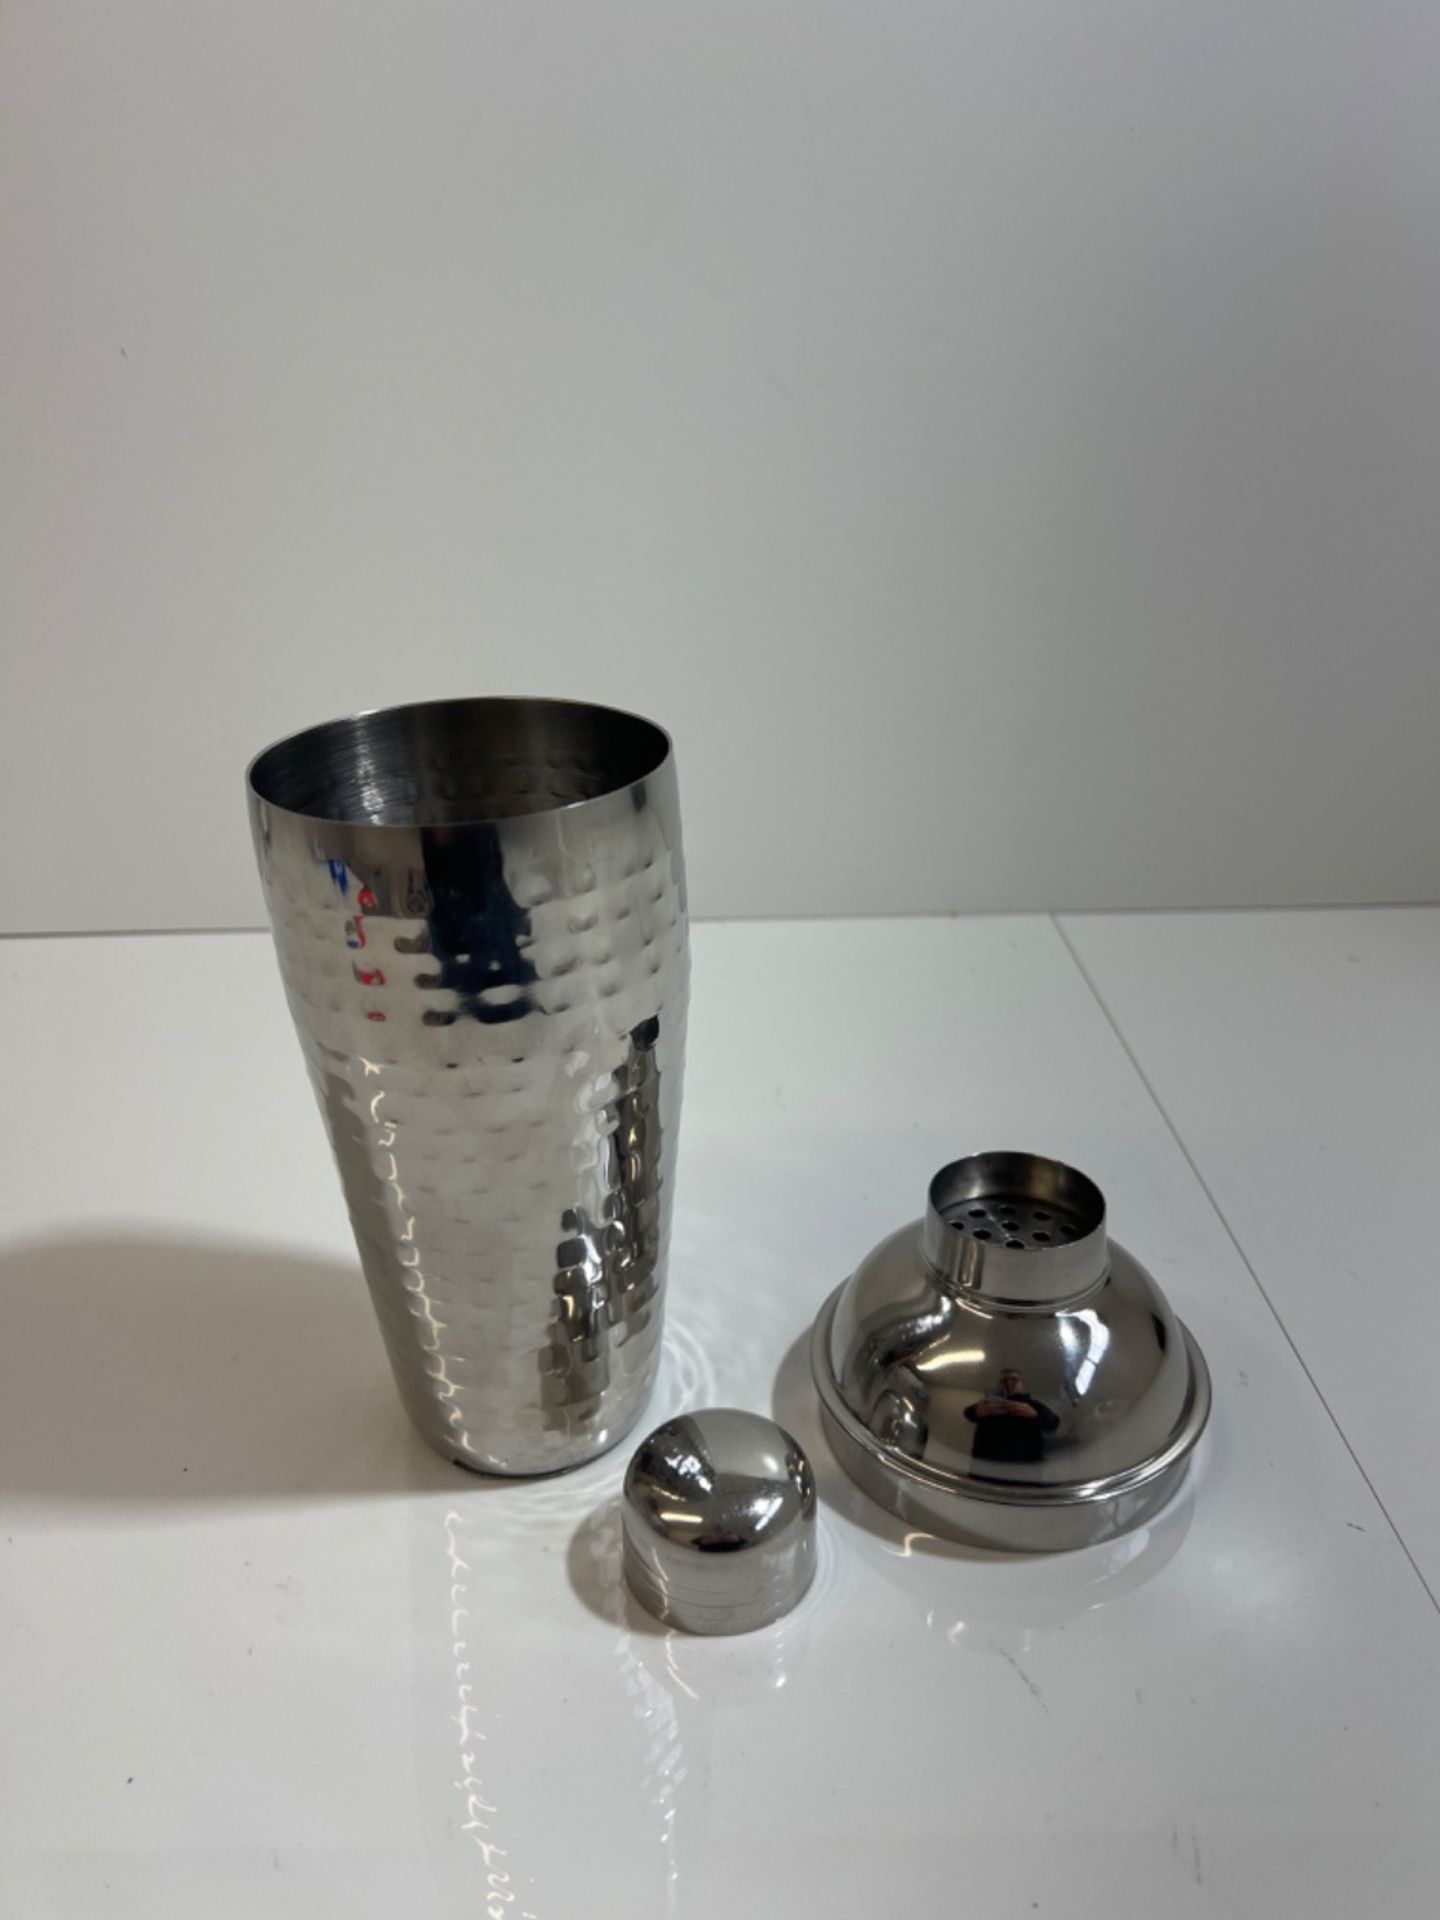 BarCraft Luxury Stainless Steel Cocktail Shaker, 700ml - Image 2 of 2